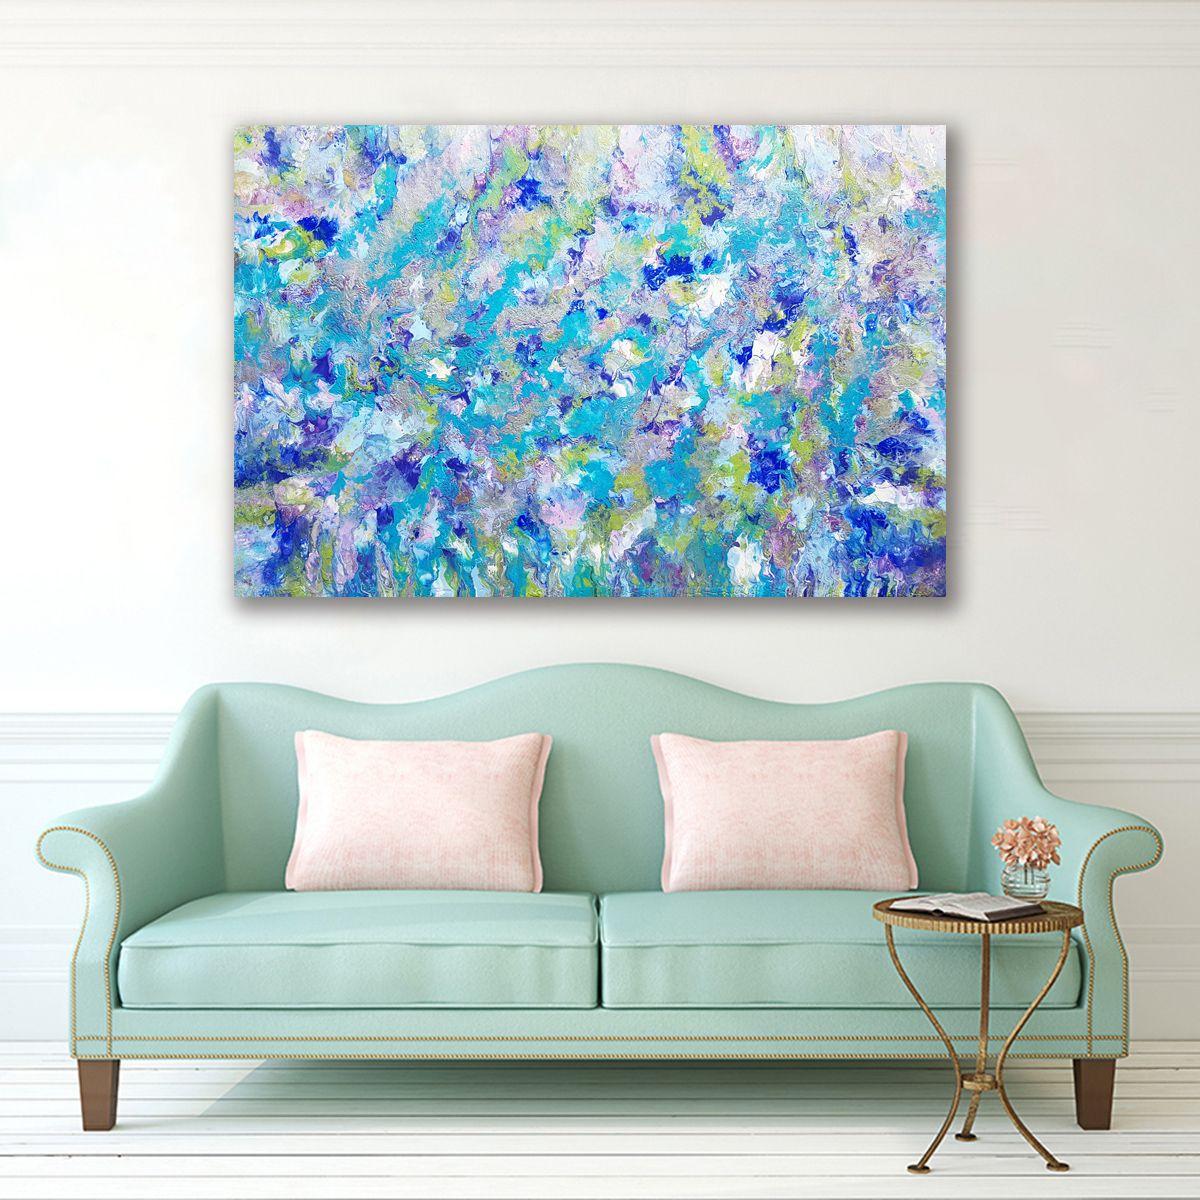 Poseidon's Garden is a large, original, abstract expressionism painting with bold yet relaxing cool colours: royal blue, turquoise and teal along with the movement in the painting captures the intense, mystical beauty of life in Poseidon's Garden.  